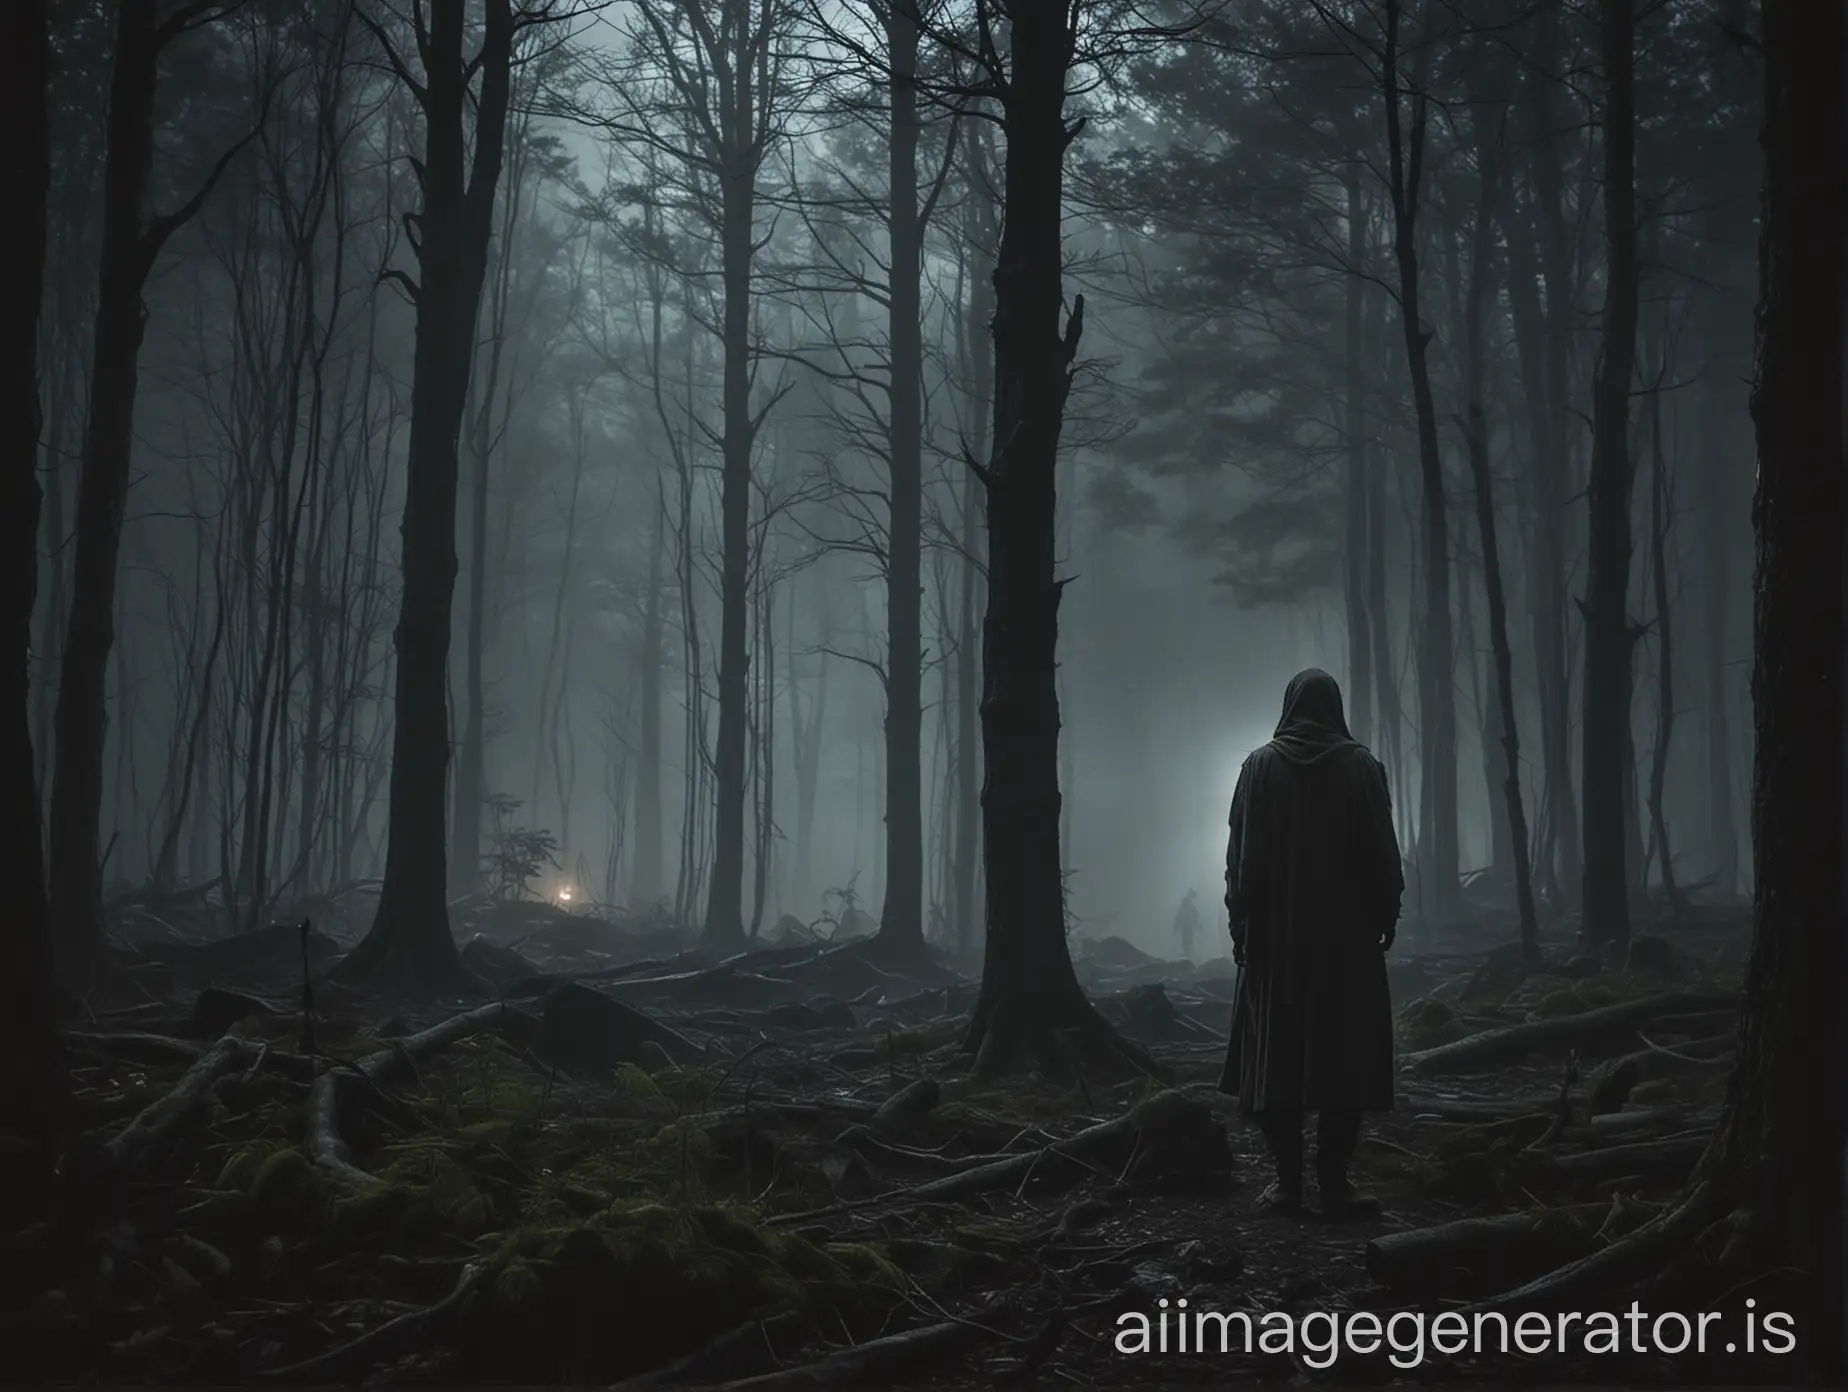 The image prompt could depict a lone figure standing in the darkness of a forest, shrouded in mystery. The figure is partially illuminated by a faint moonlight, casting eerie shadows around them. In the background, a distant glow suggests the presence of a hidden encampment or base. The atmosphere is tense and suspenseful, evoking the sense of danger and intrigue inherent in espionage missions.